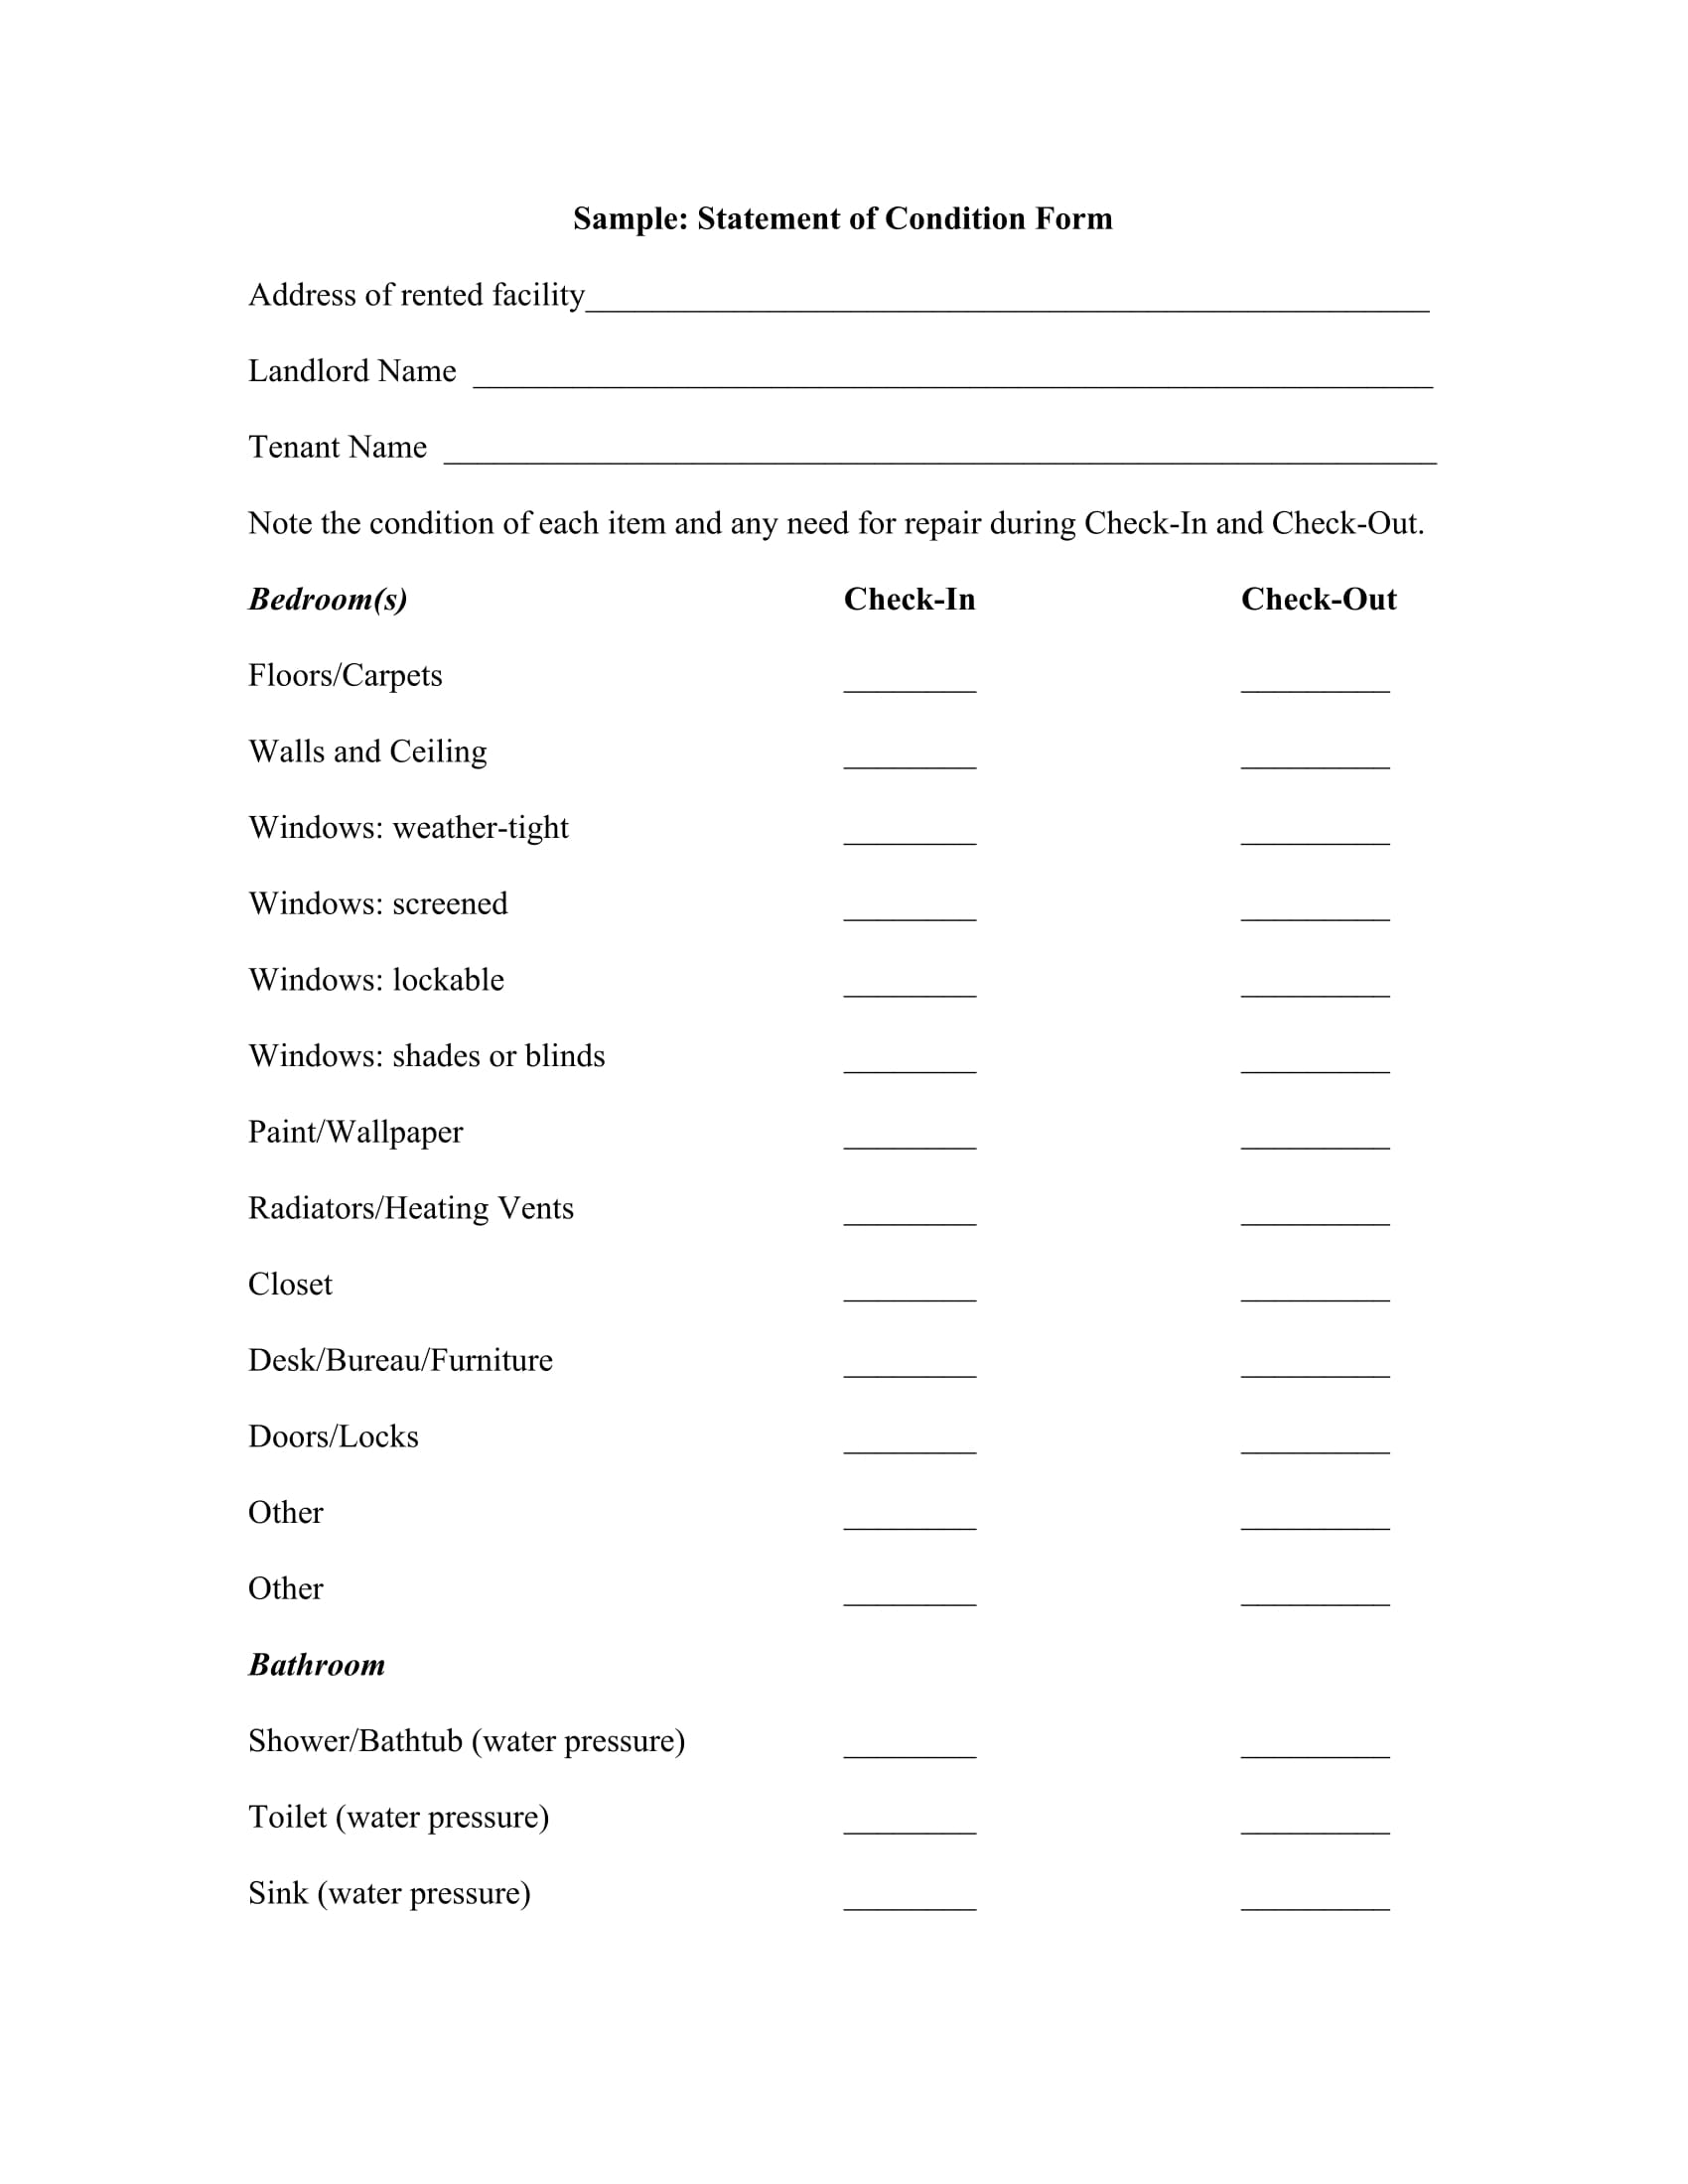 landlord statement of condition form 1